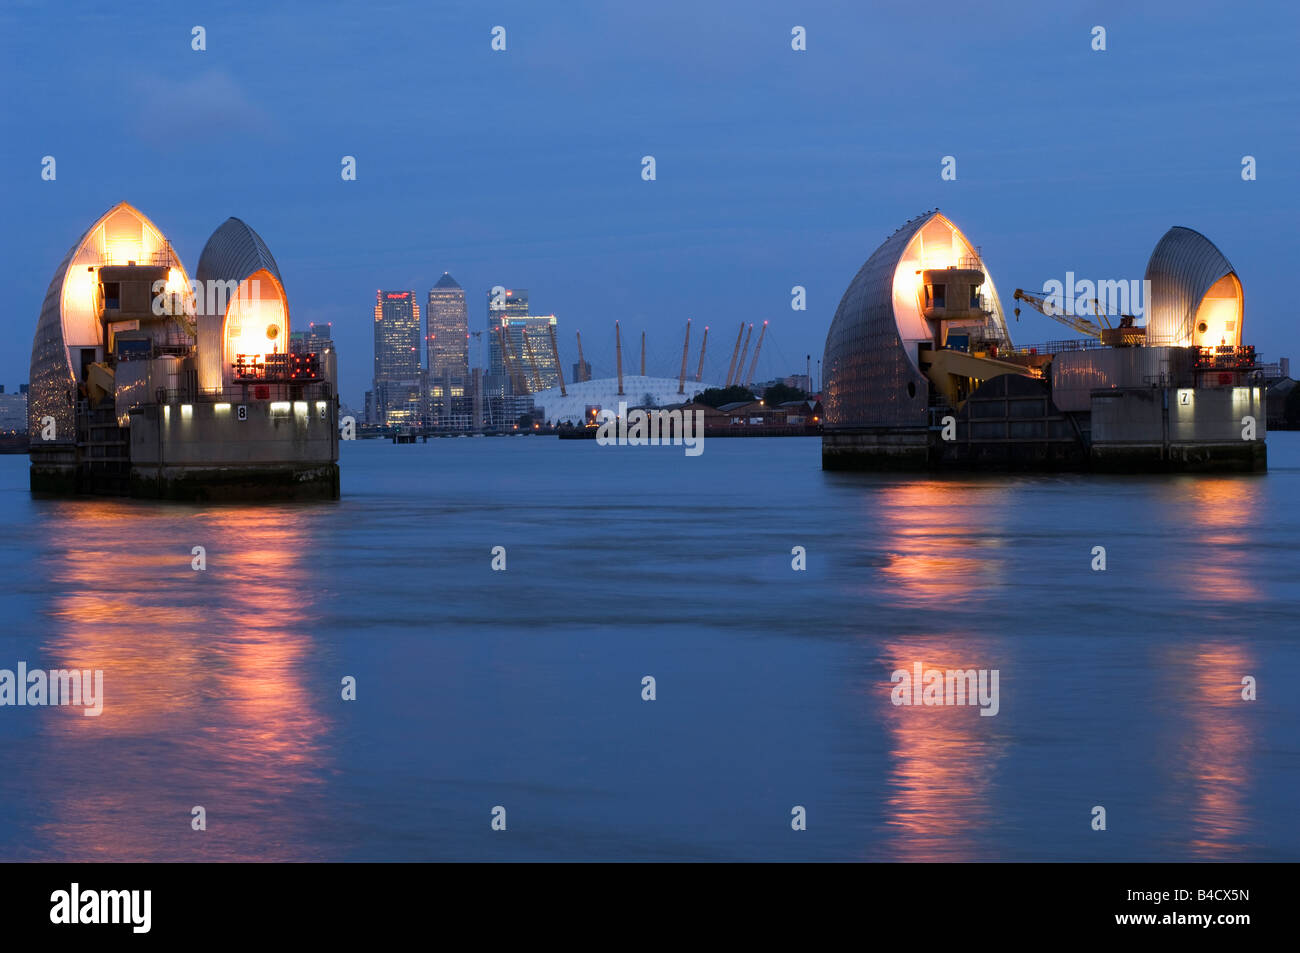 London England The Thames Flood Barrier with The Mellenium Dome and Canary Wharf in the background at dusk Stock Photo